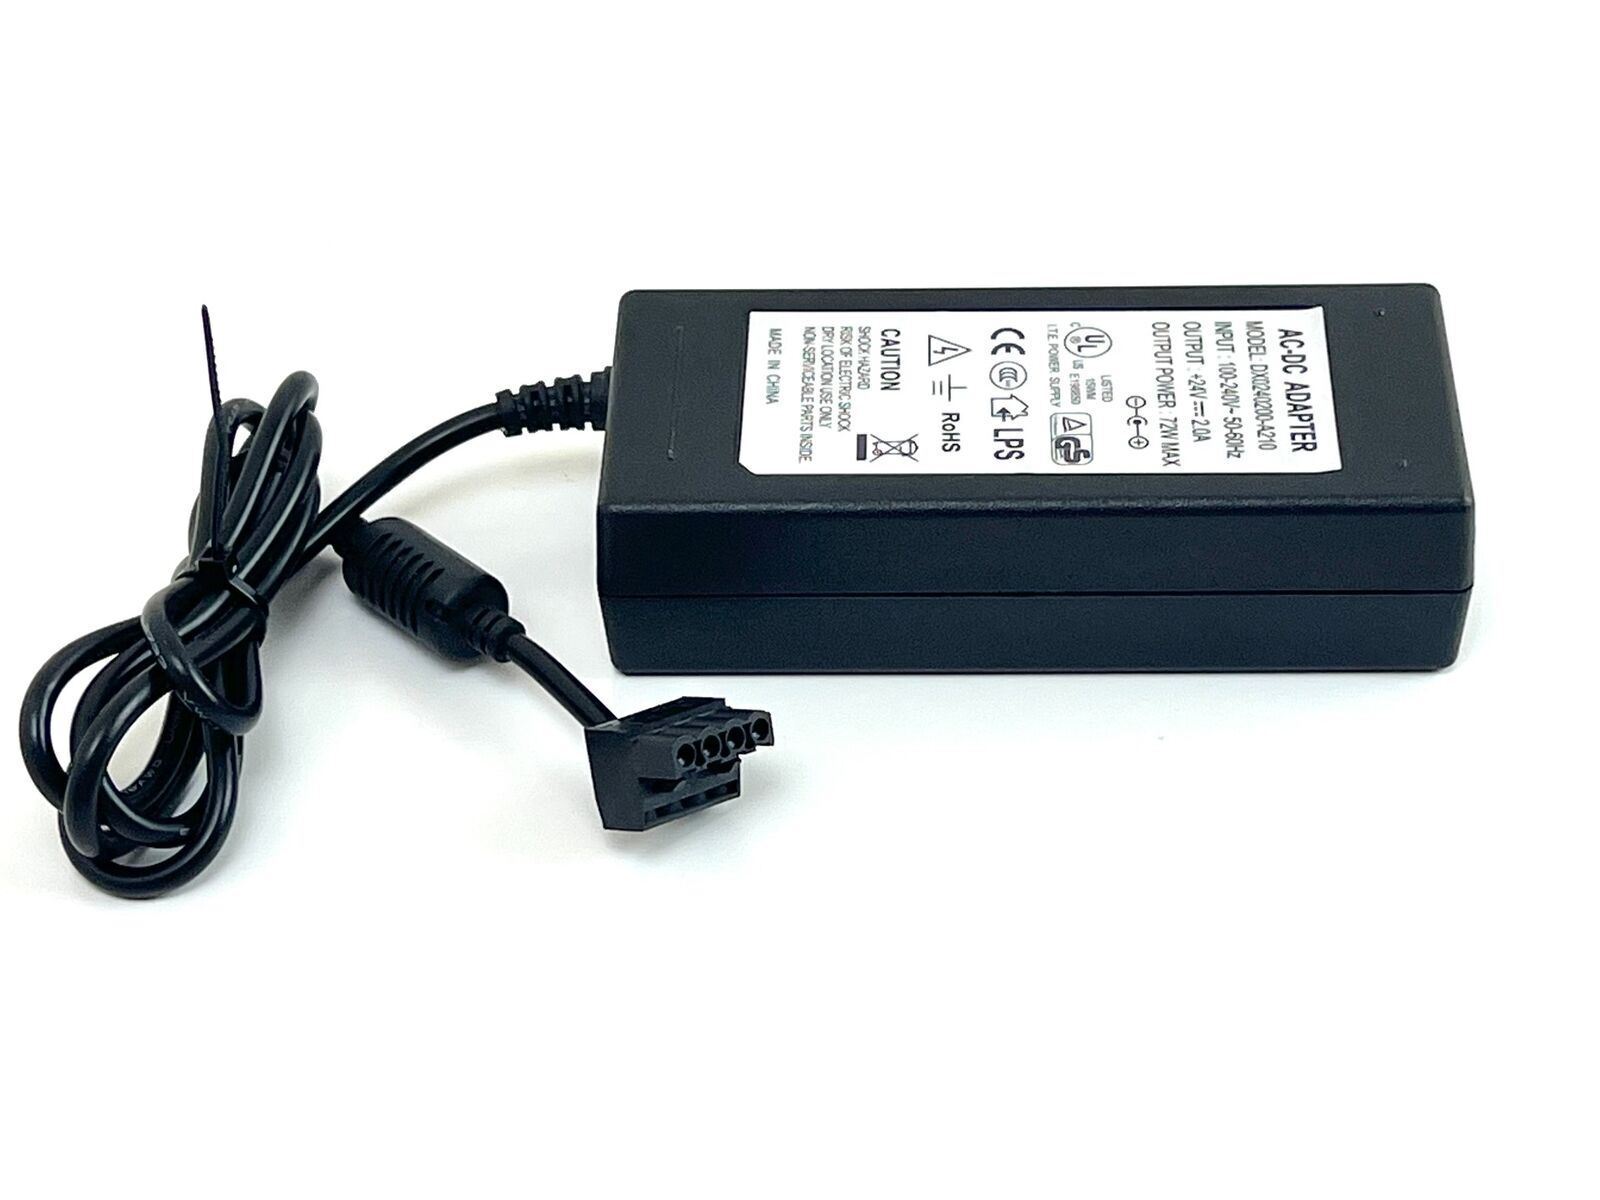 *Brand NEW*Genuine Parts 24V 2.0A 72W AC-DC Adapter DX0240200-A210 Power Supply